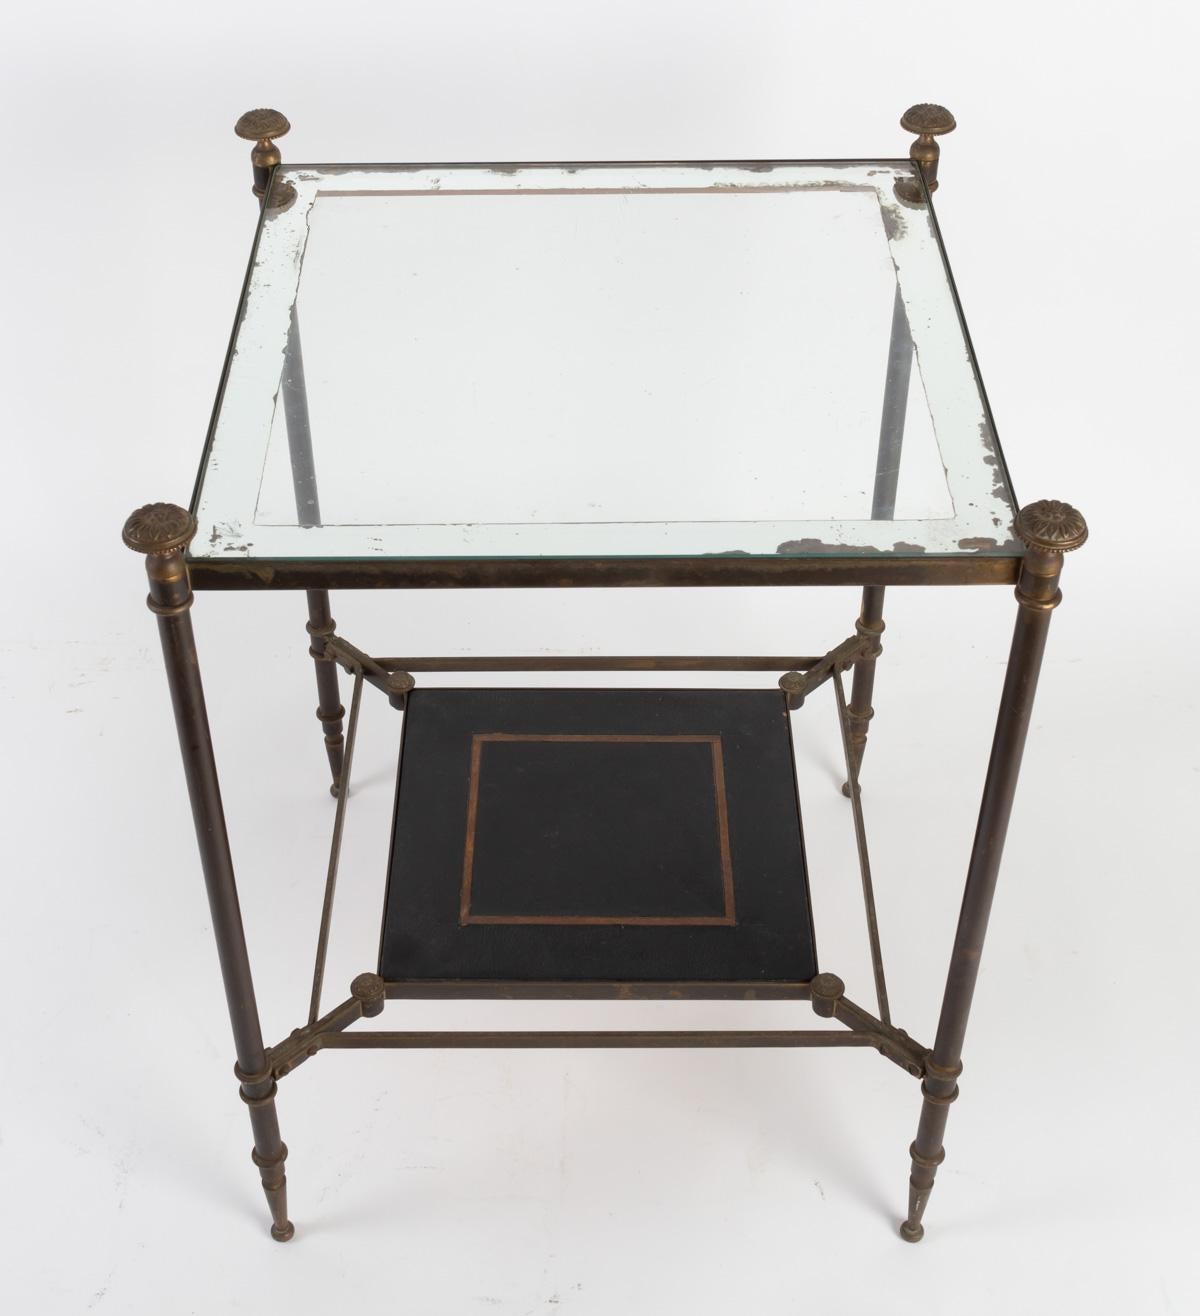 Elegant pair of small square side tables attributed to Maison Jansen, France, 1950s.
They are composed of two trays, the upper tray in églomisé glass and the lower tray in wood covered with leather, supported by a brass structure.
Attributed to